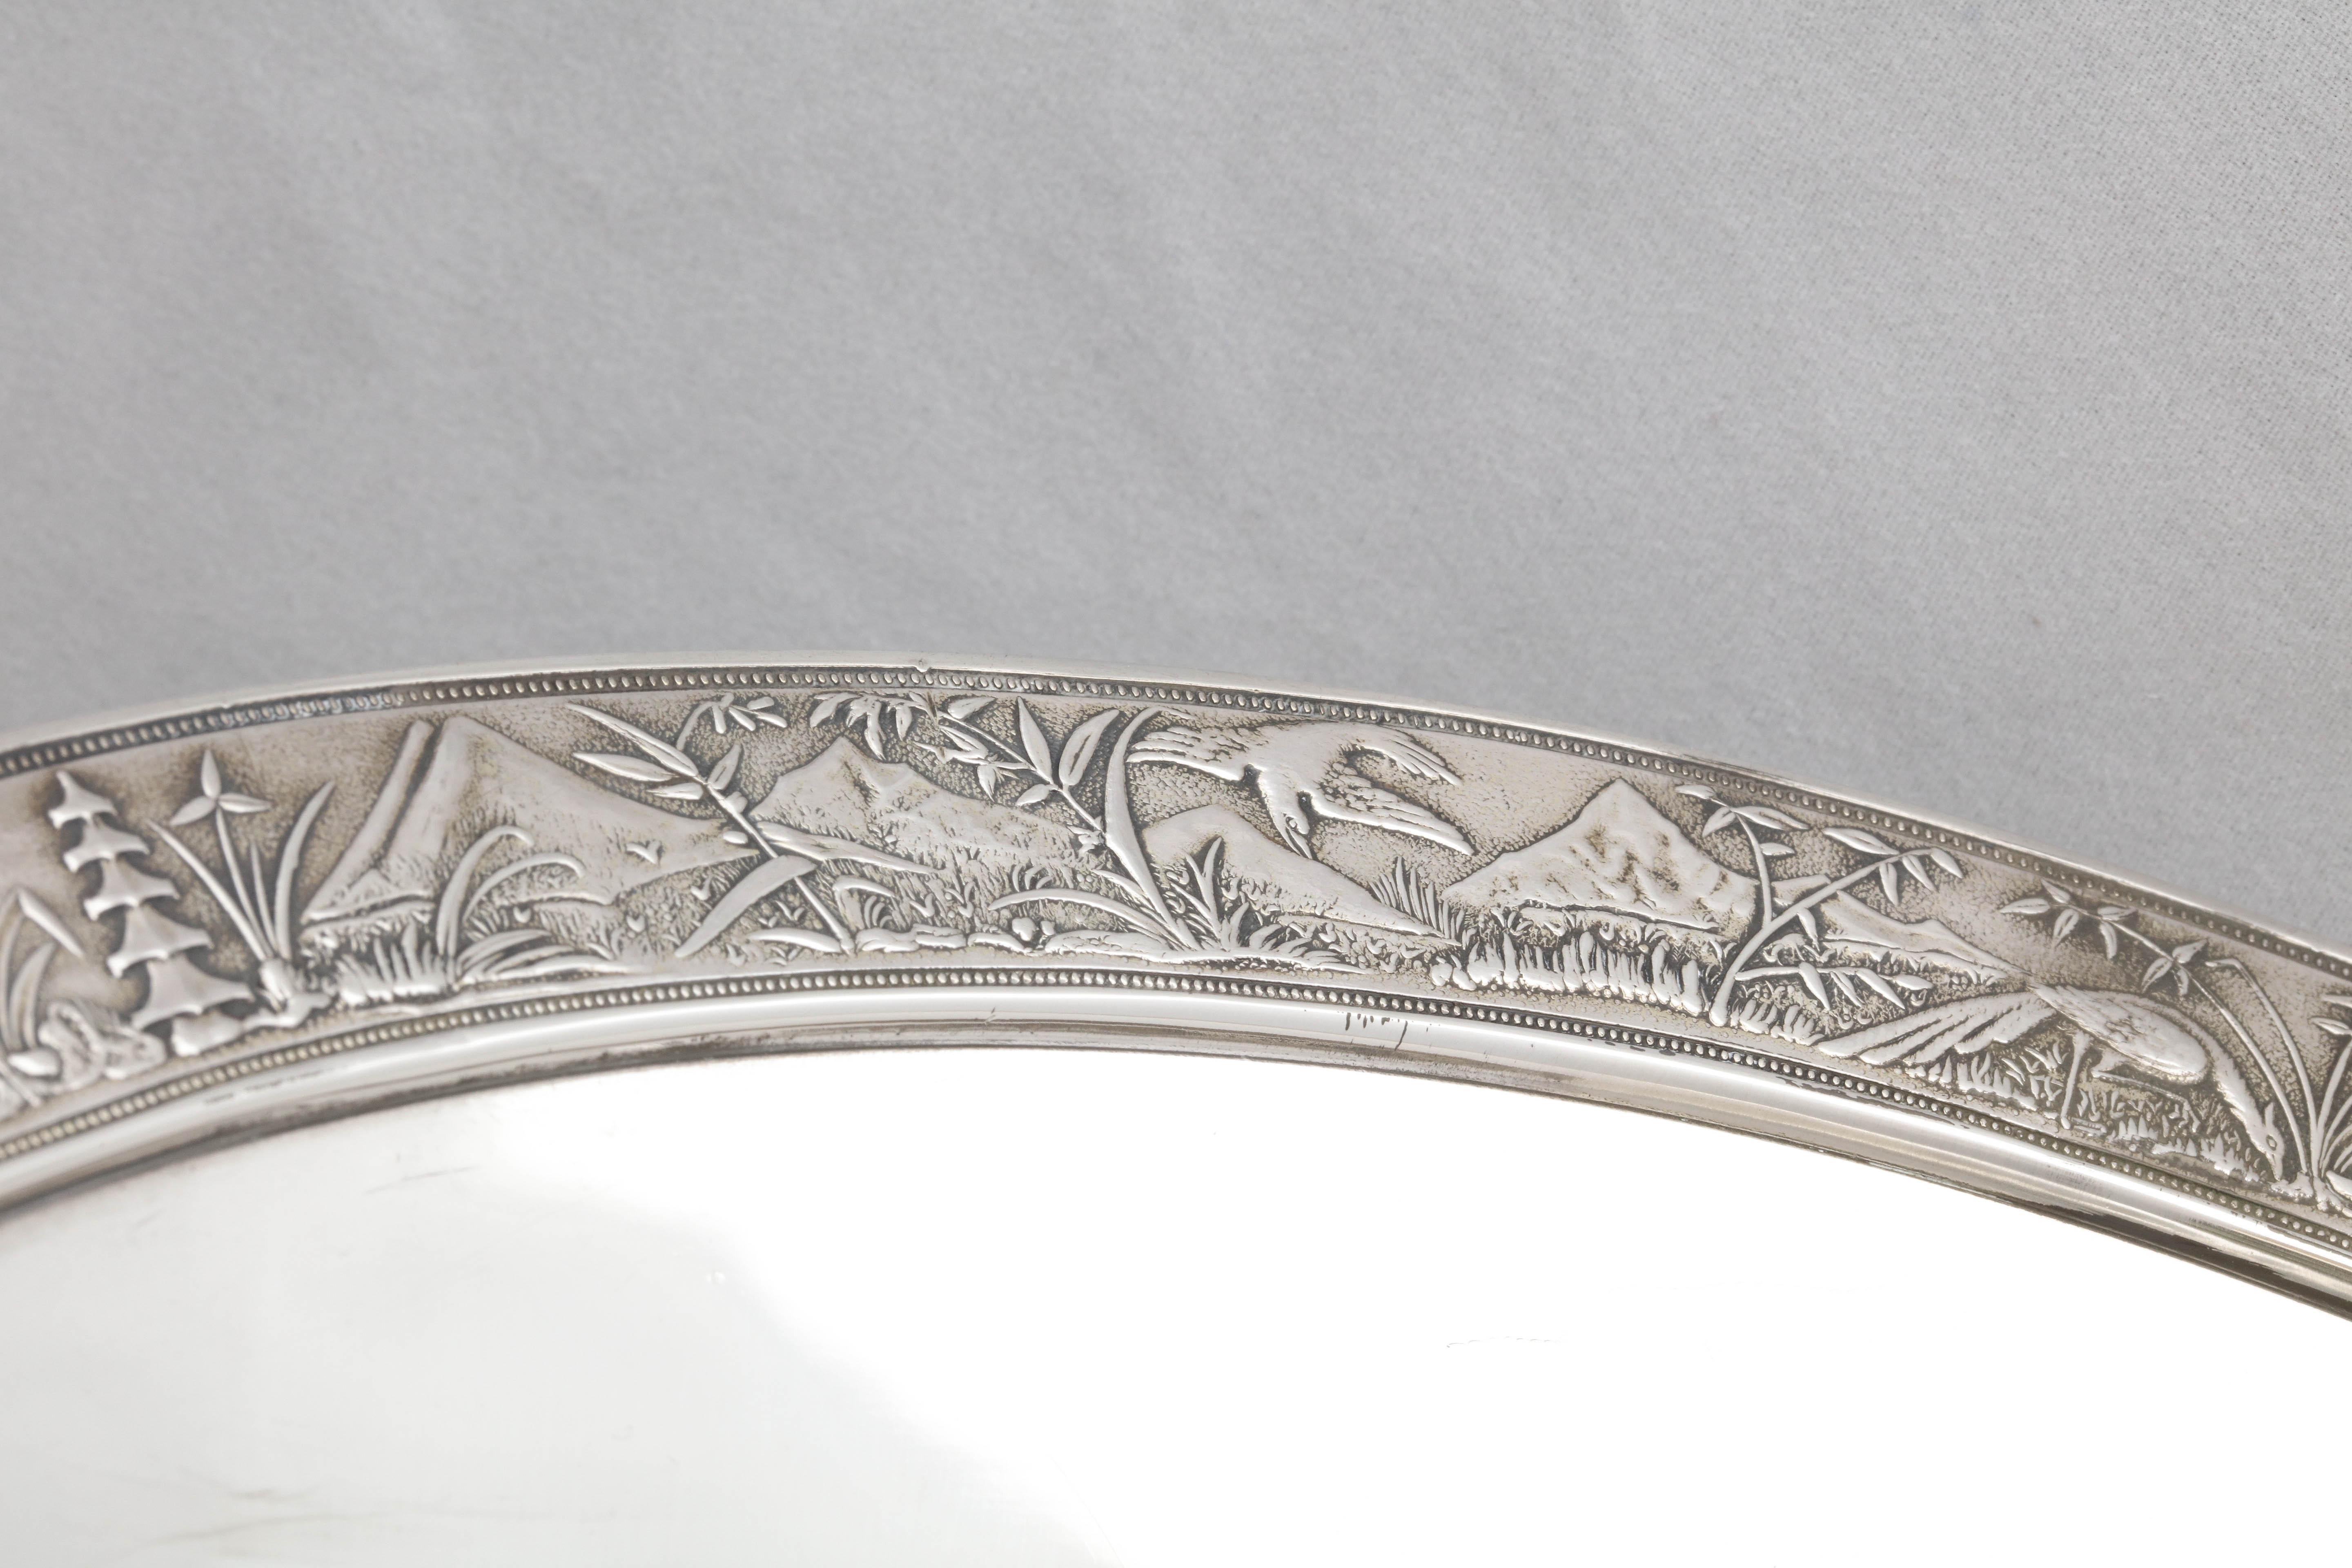 Rare Japonesque Sterling Silver Footed Centerpiece Bowl by Gorham 7